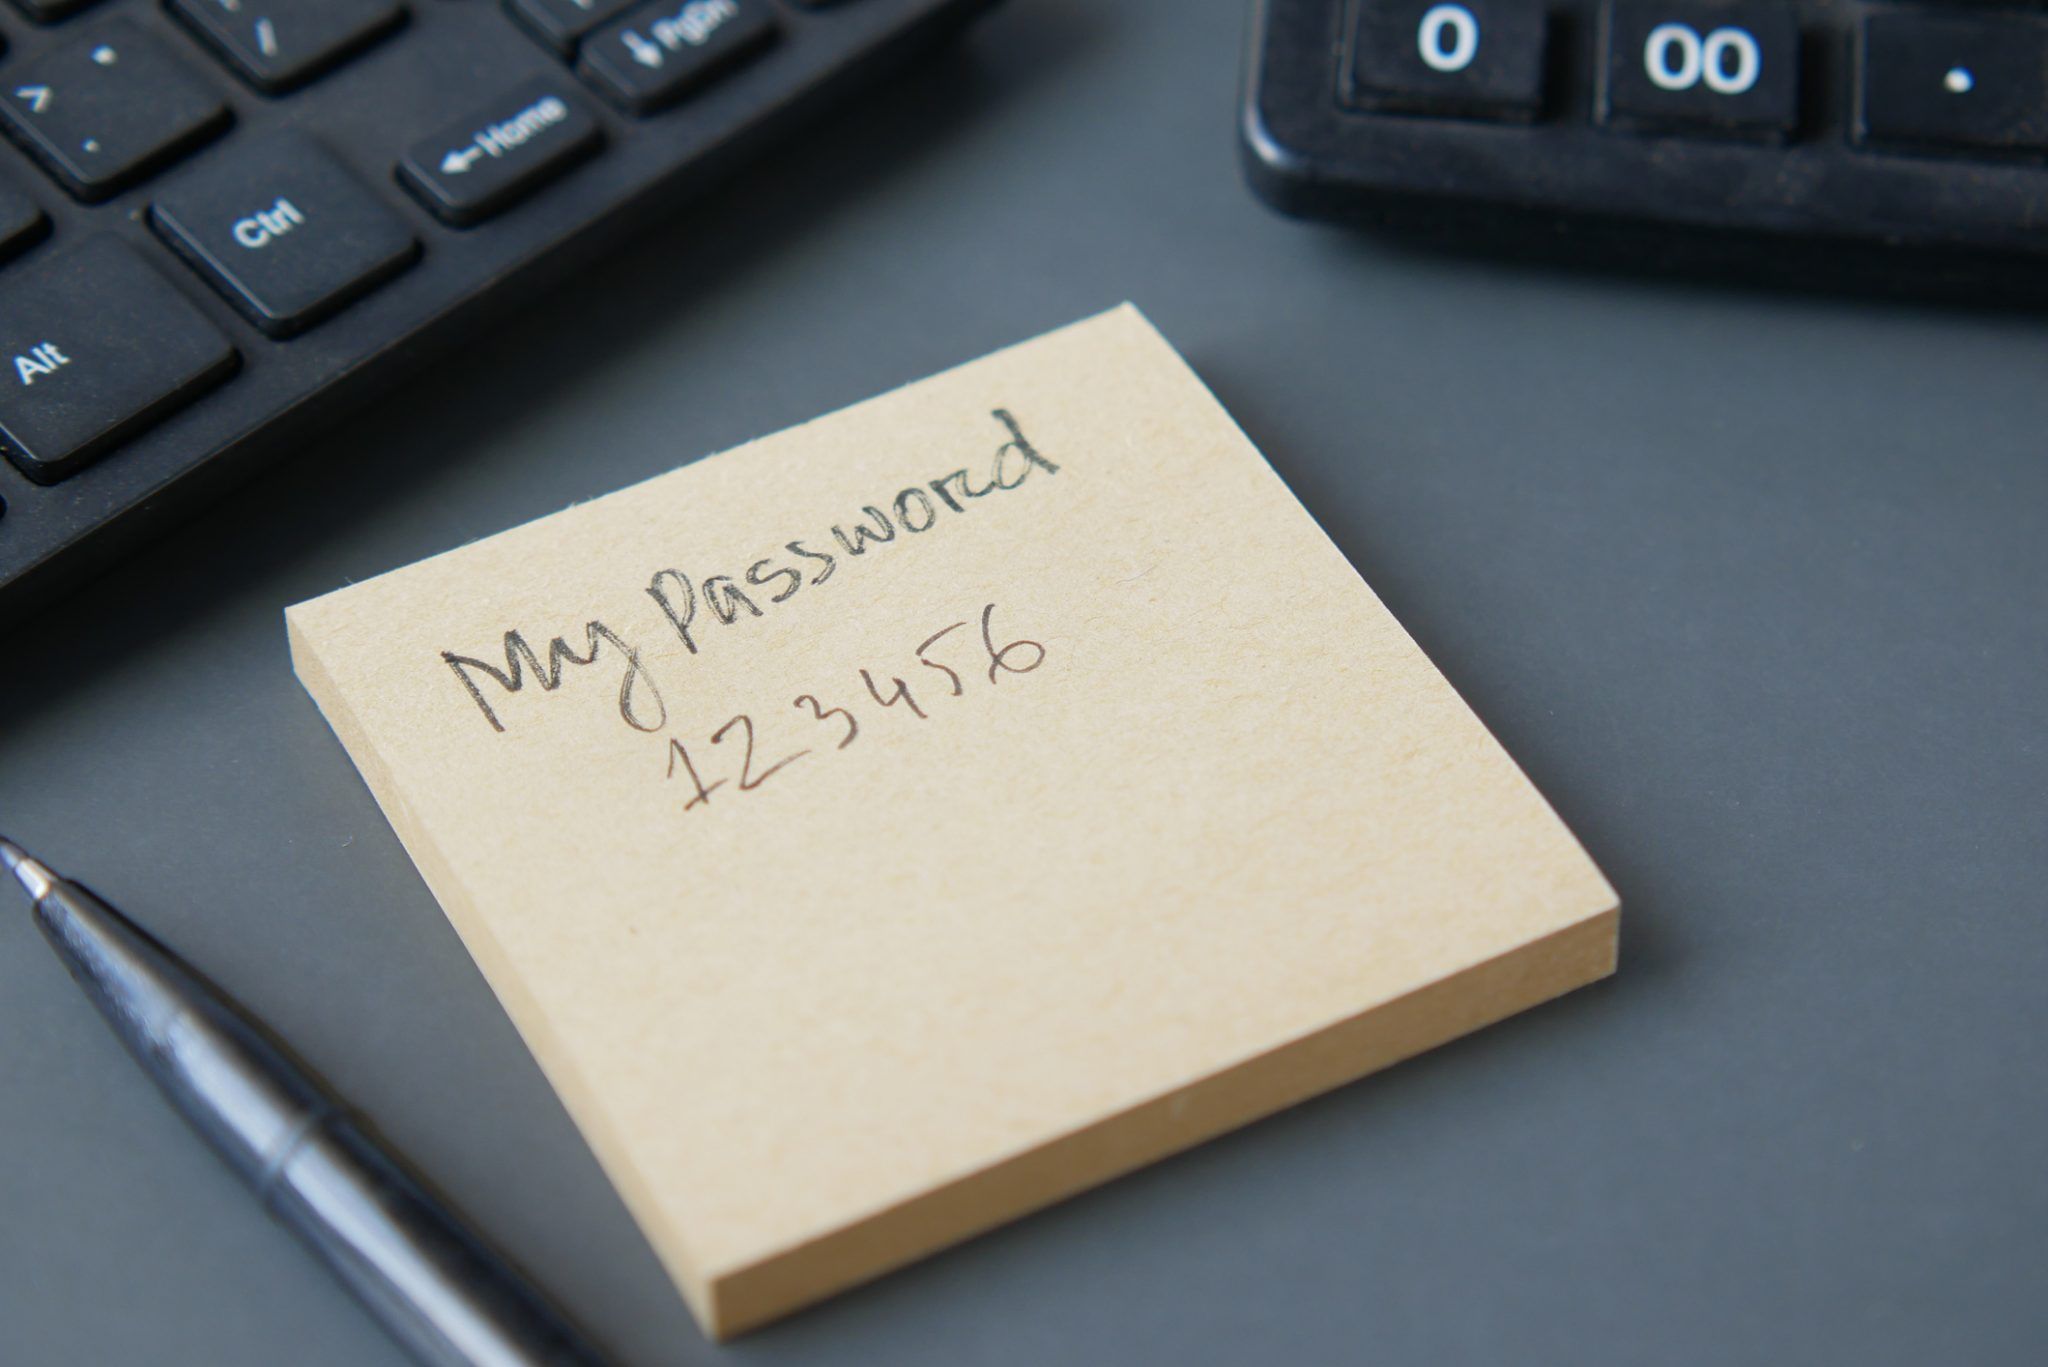 If you're still using '123456' as your password, it might be time to have a re-think...